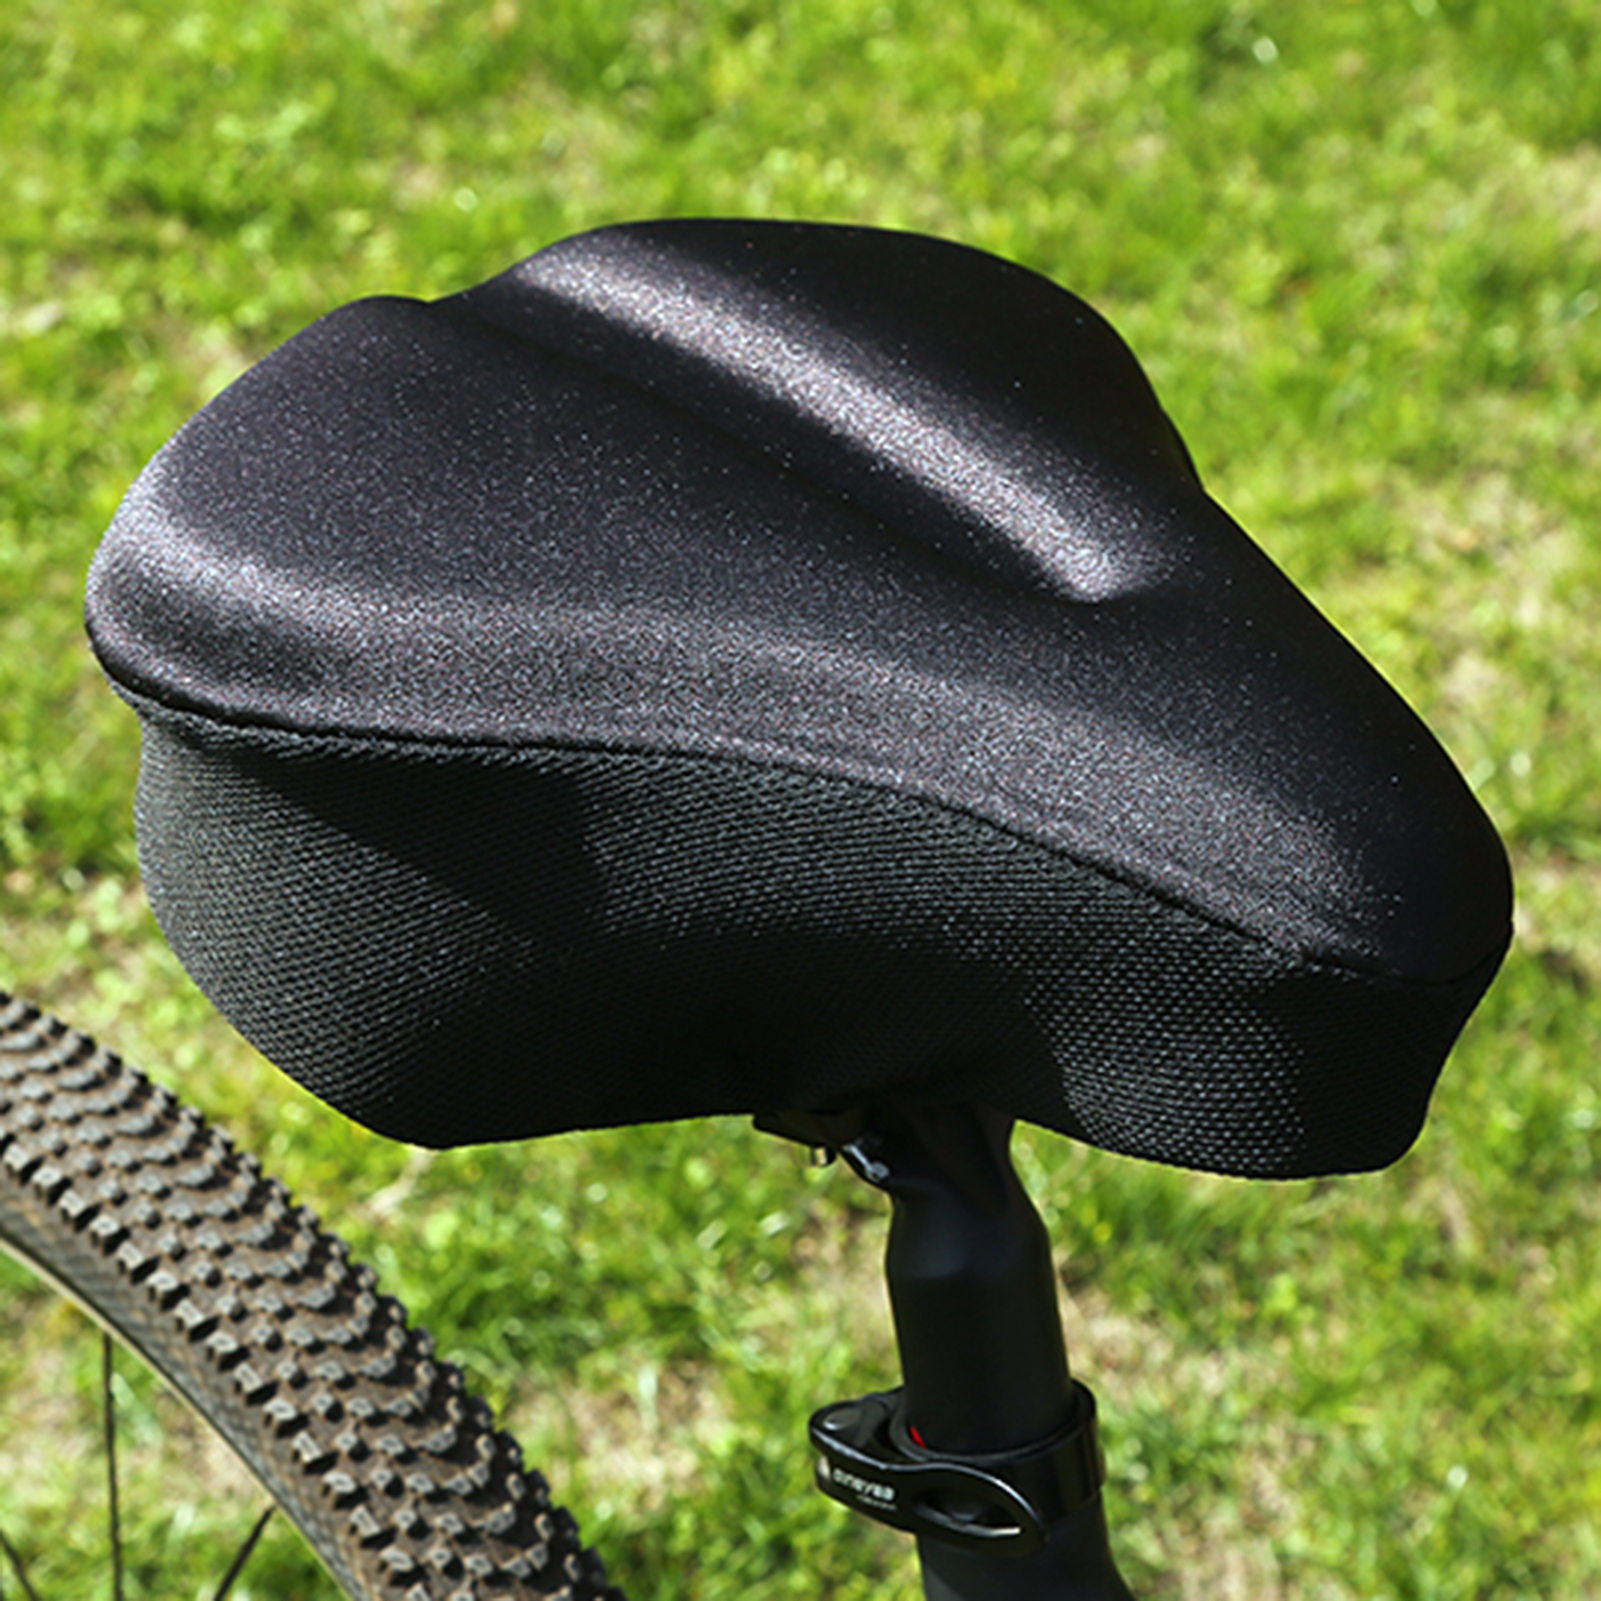 Comfortable Silica Padded Bike Bicycle Saddle Cushion for Mountain Road Exercise Bike Resistant Saddle Cover waitFOR 3D Silicone Gel Bike Seat Cover Cushion